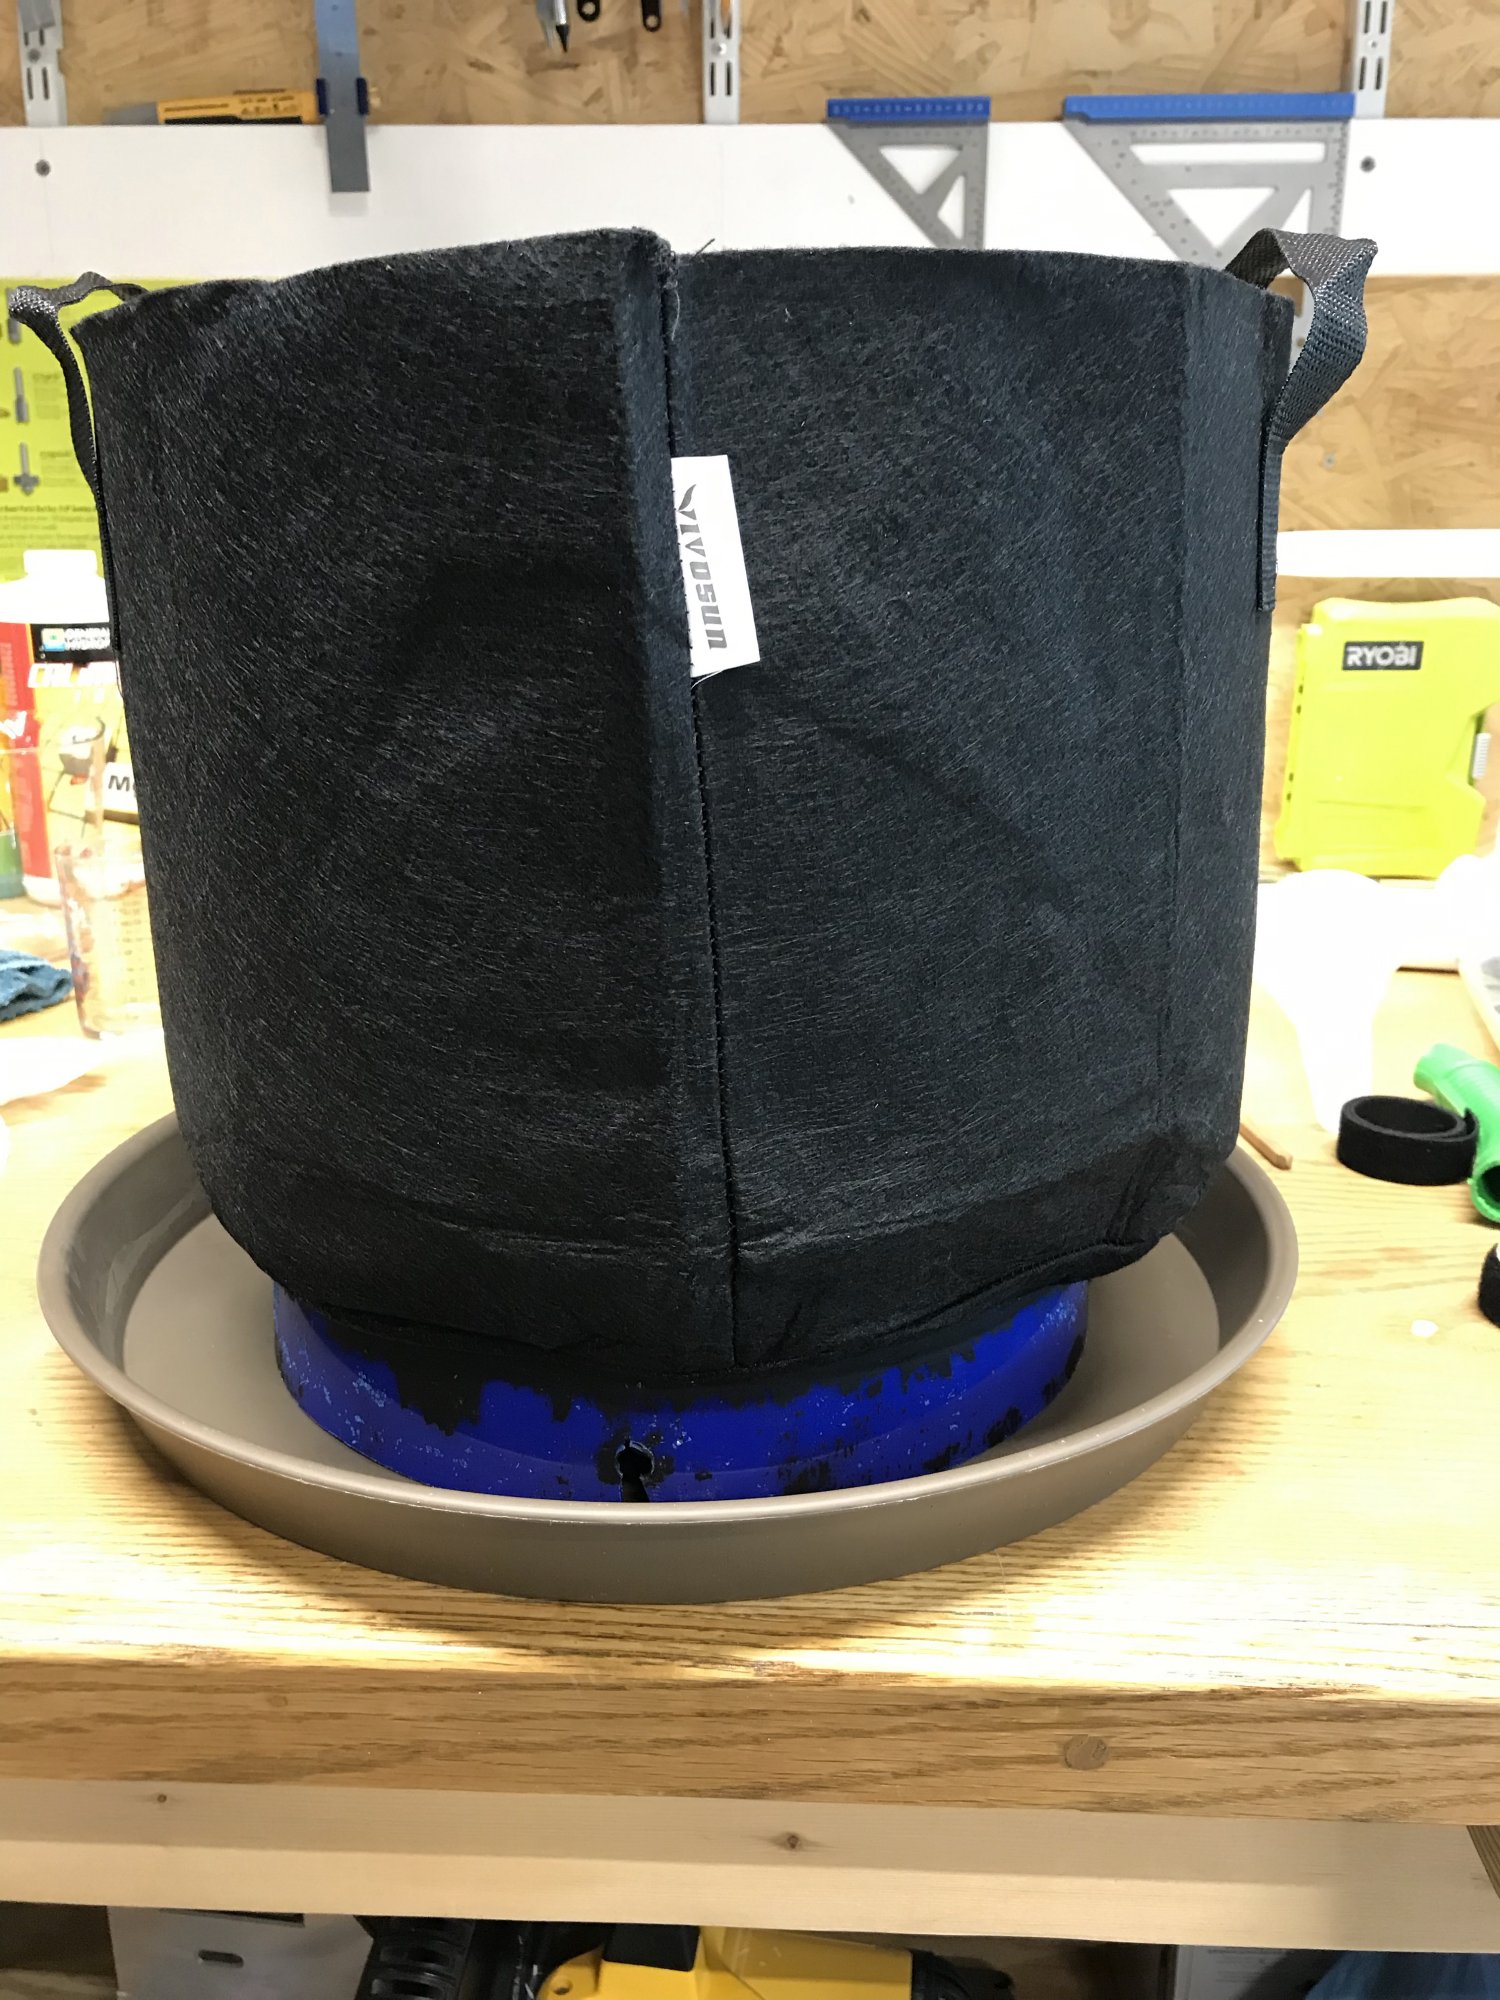 I came up with fabric pot stand 2